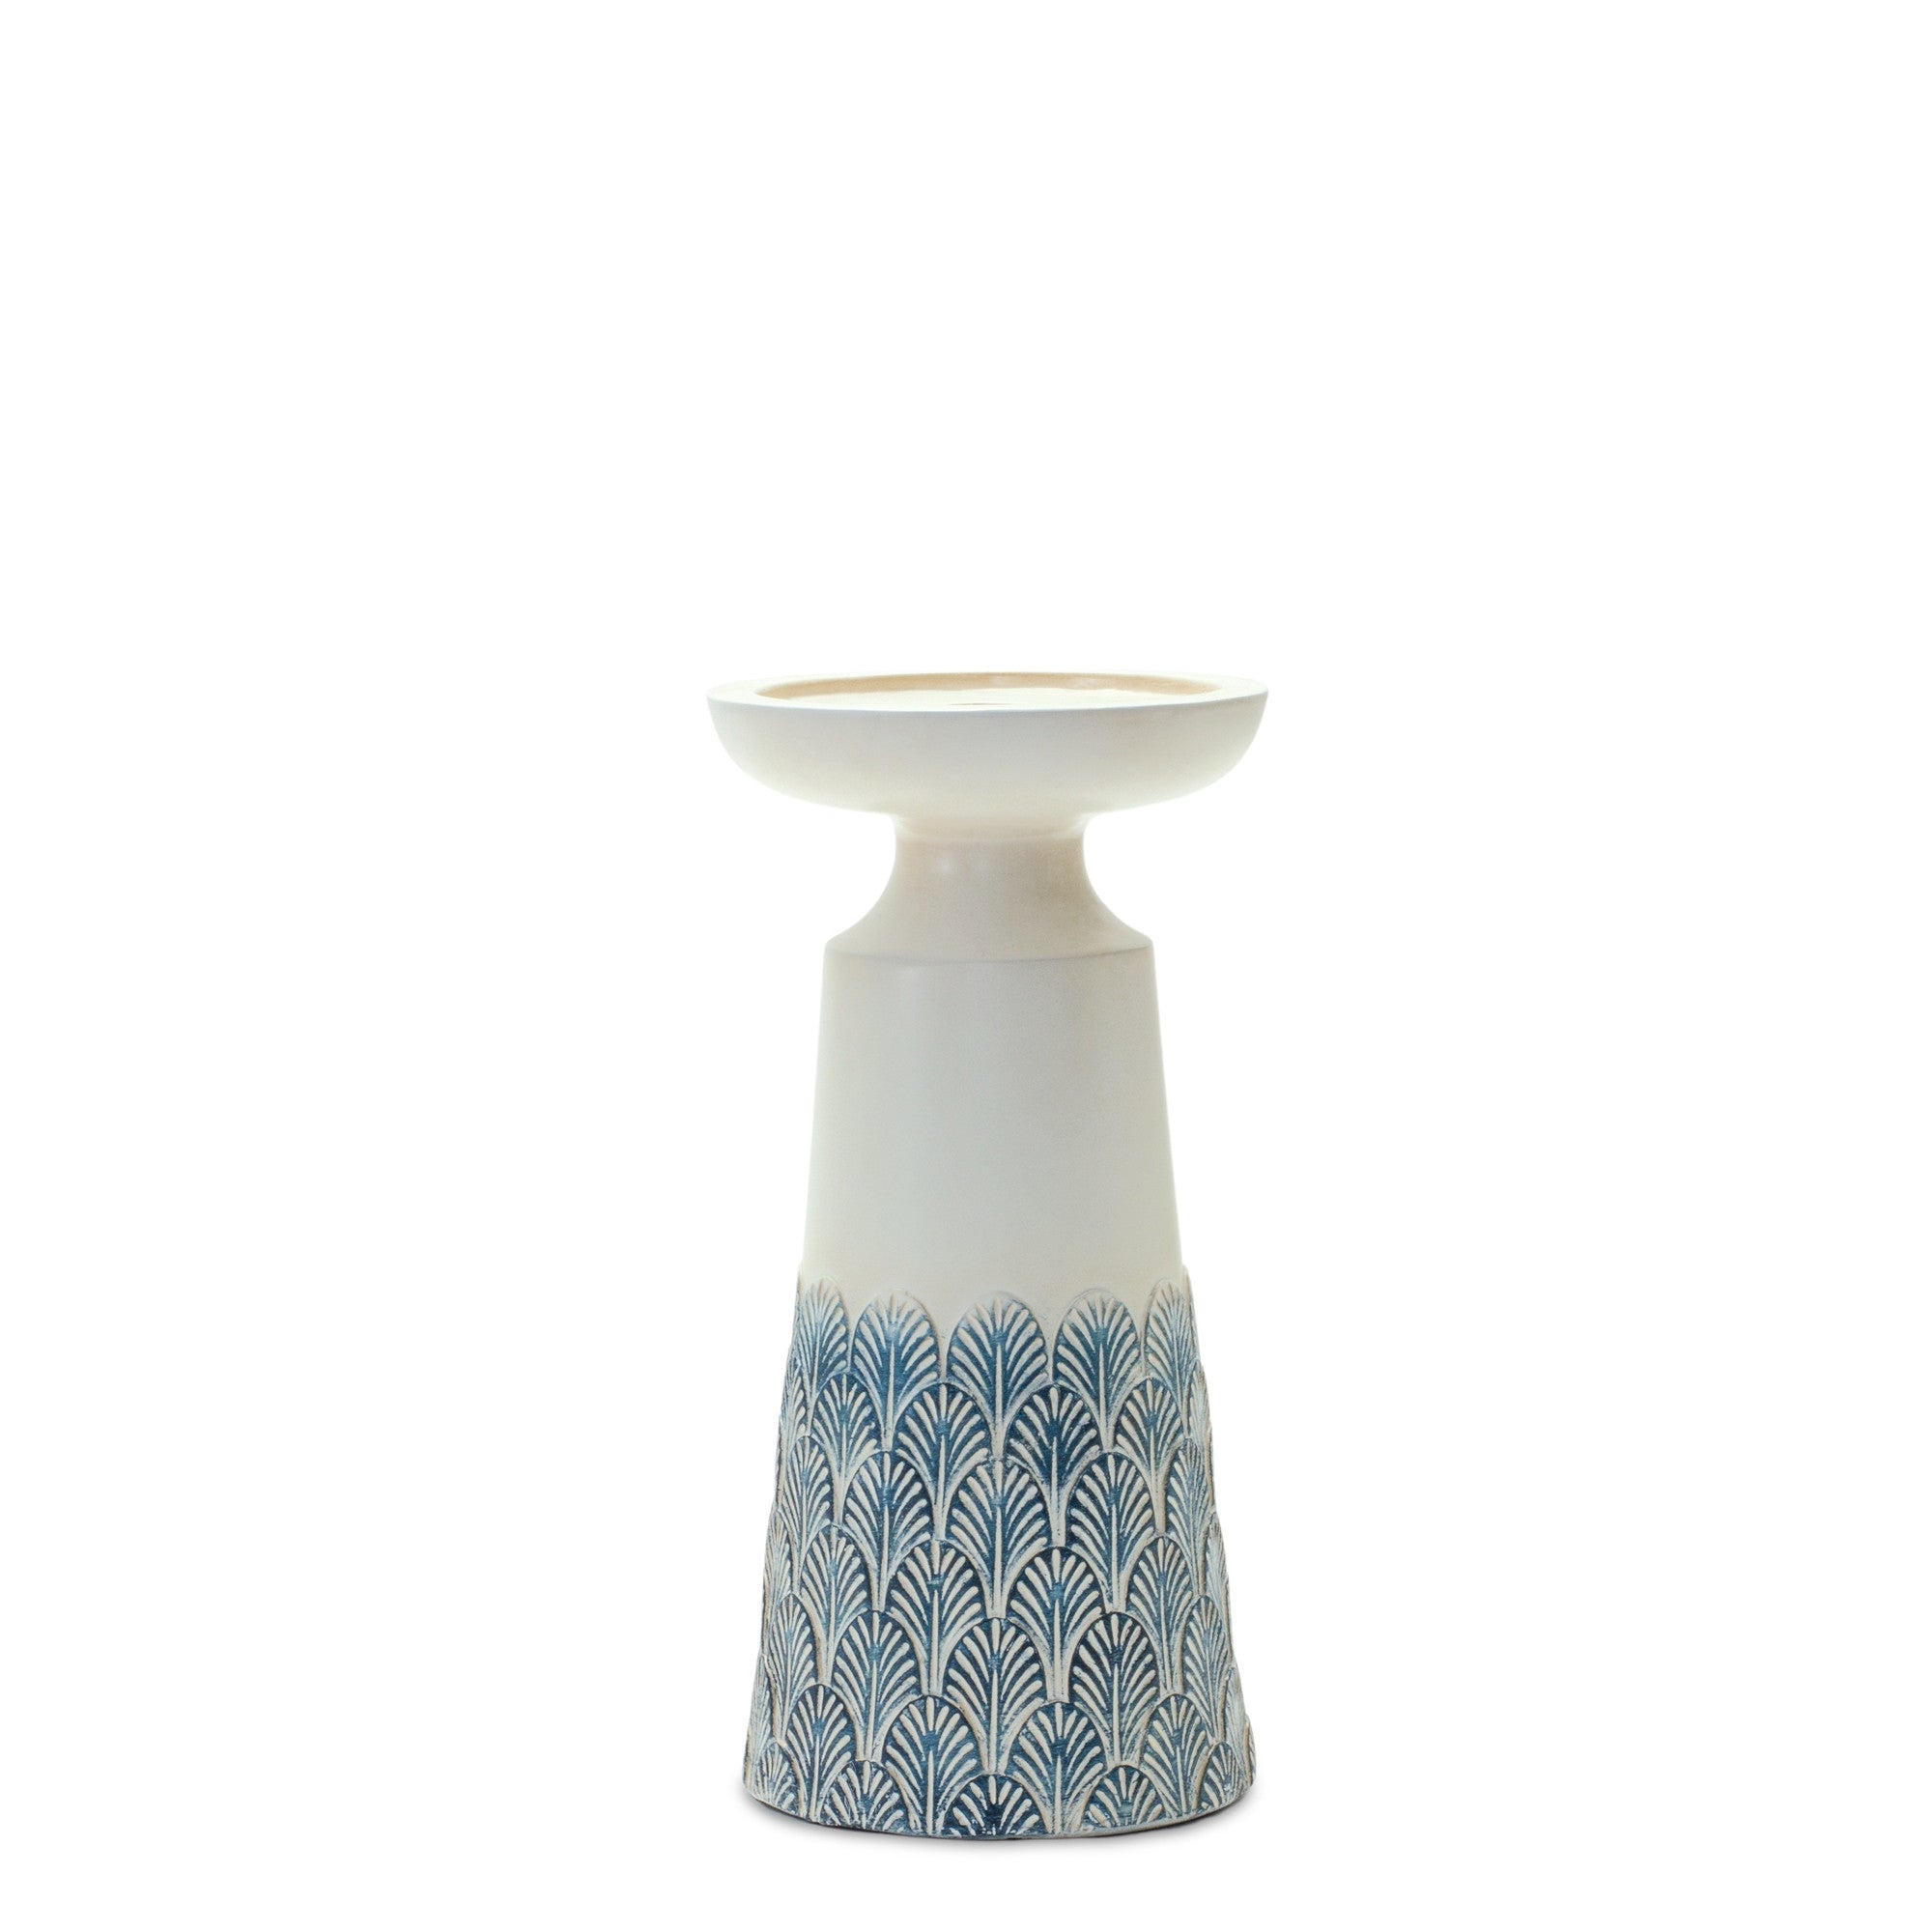 Set of Two White and Blue Tabletop Pillar Candle Holders